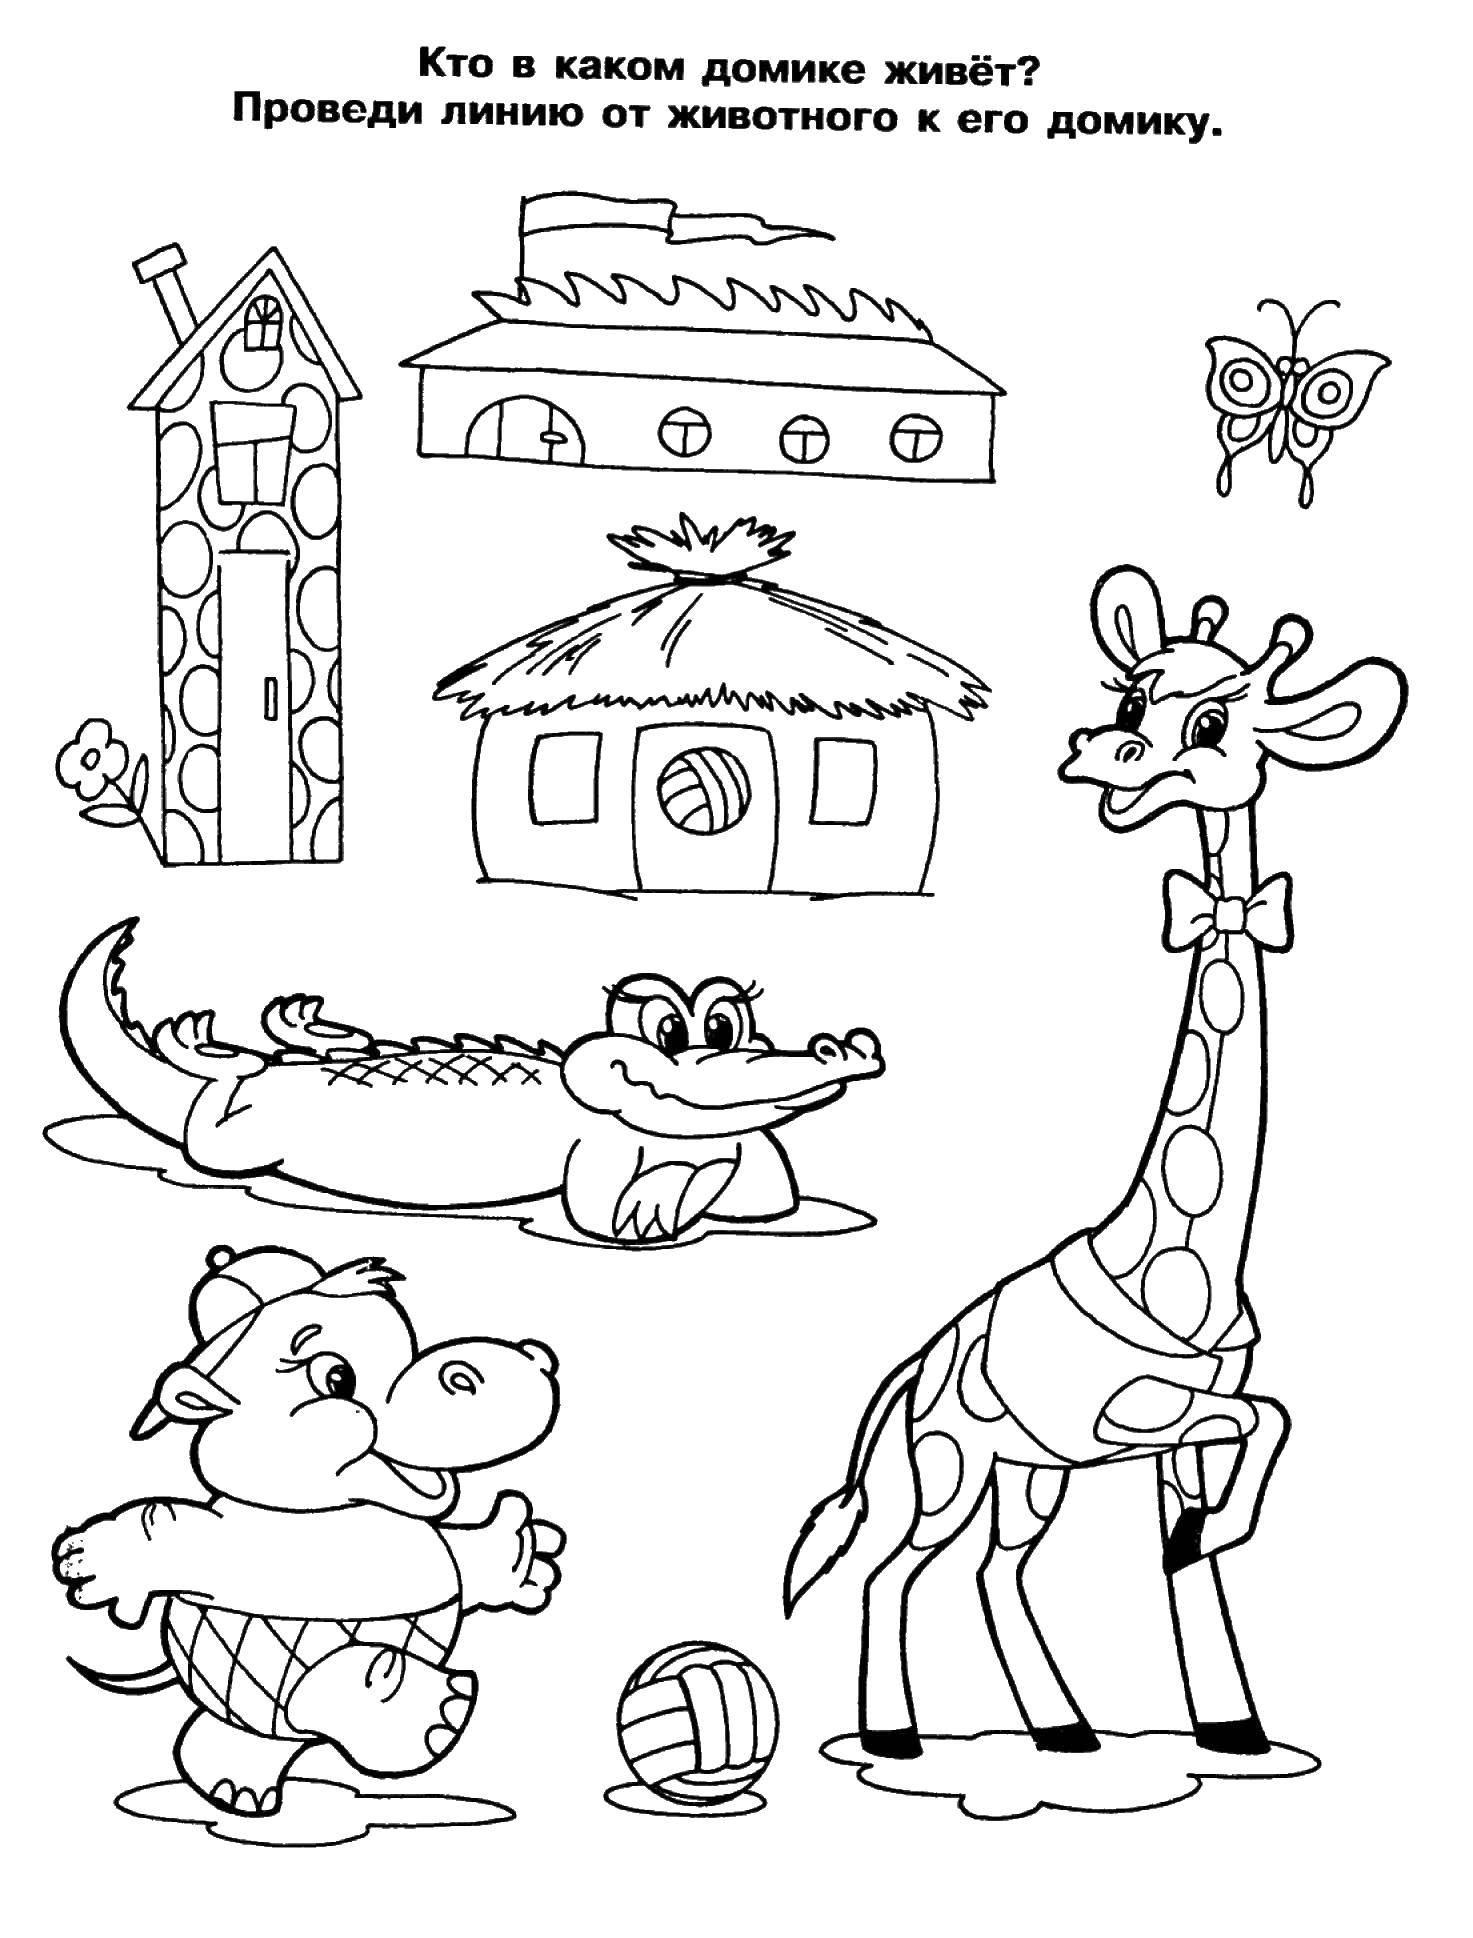 Coloring Run a line from the animal to the house. Category coloring for little ones. Tags:  for little, thinking.